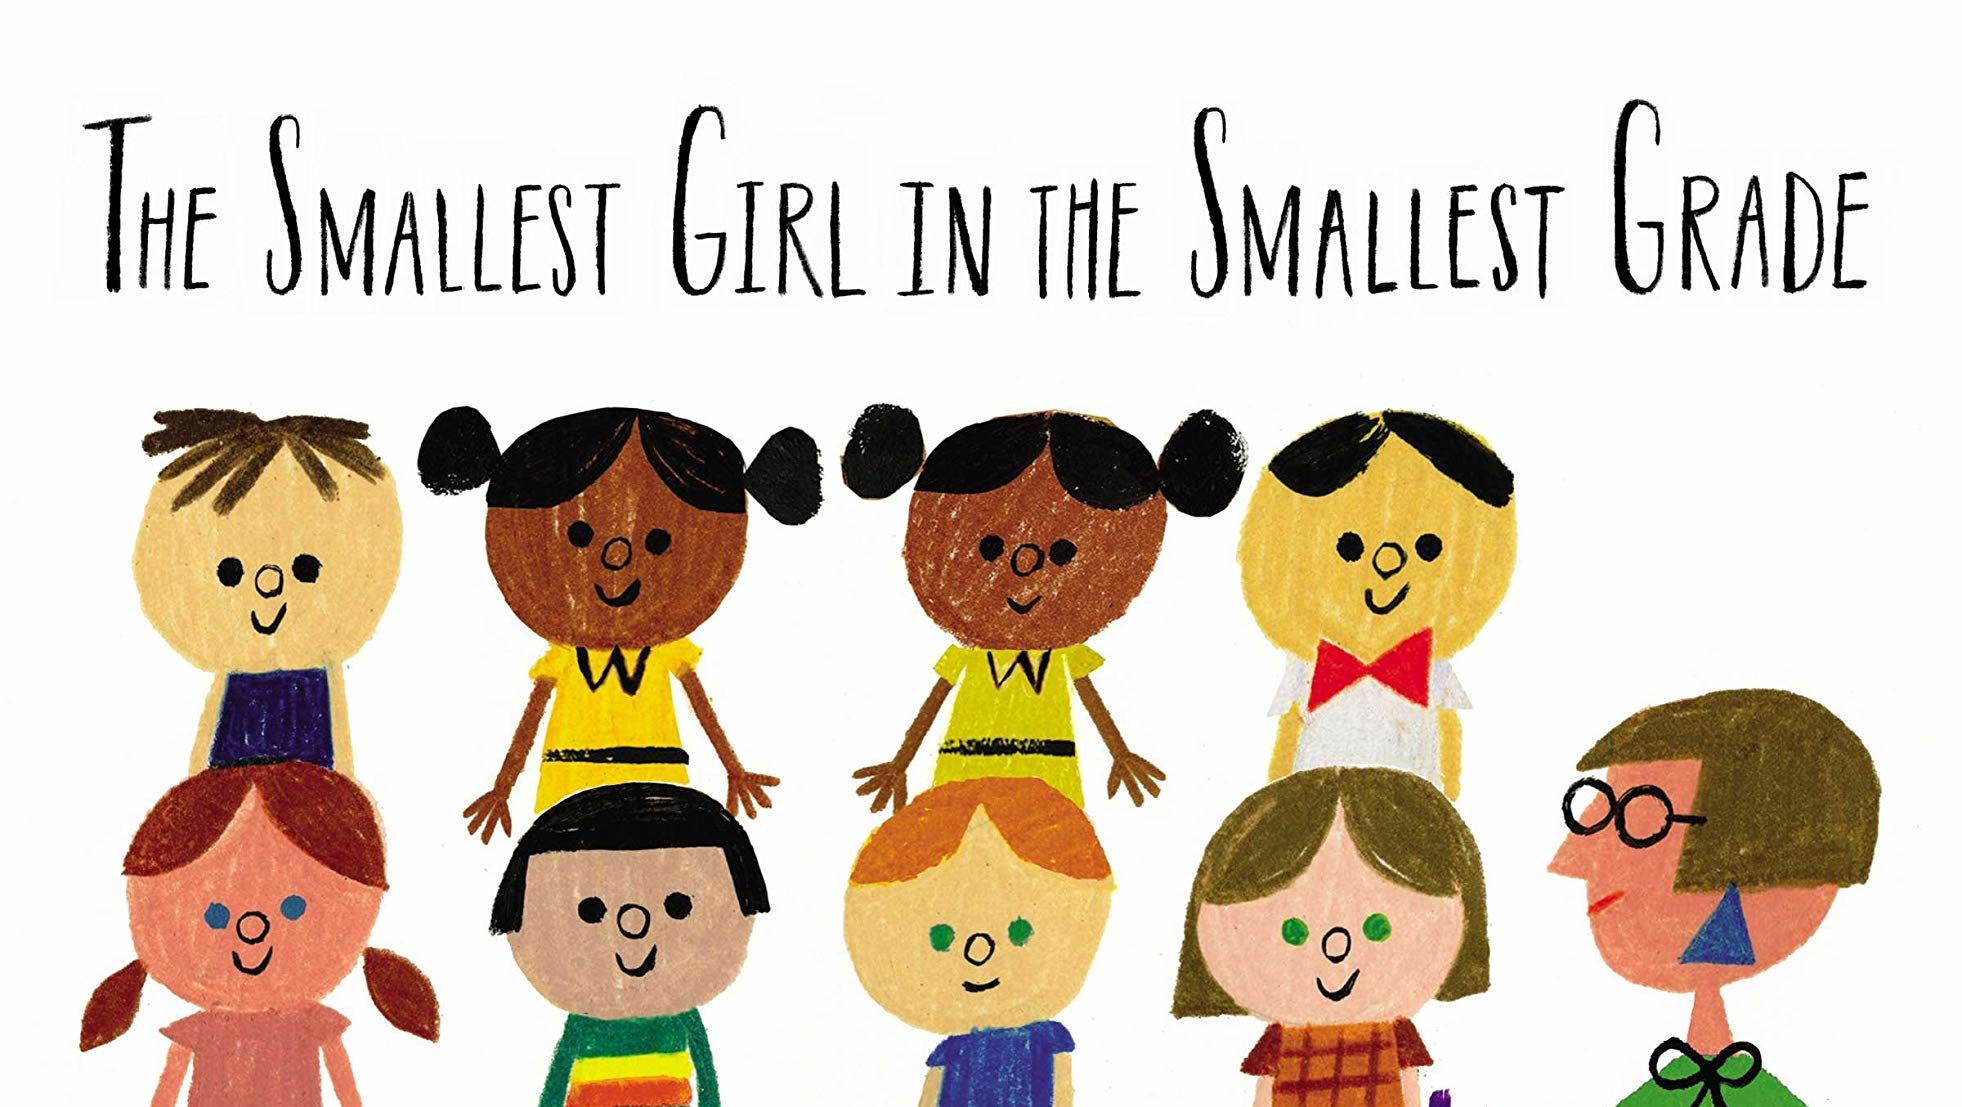 Cover for "The Smallest Girl in the Smallest Grade"